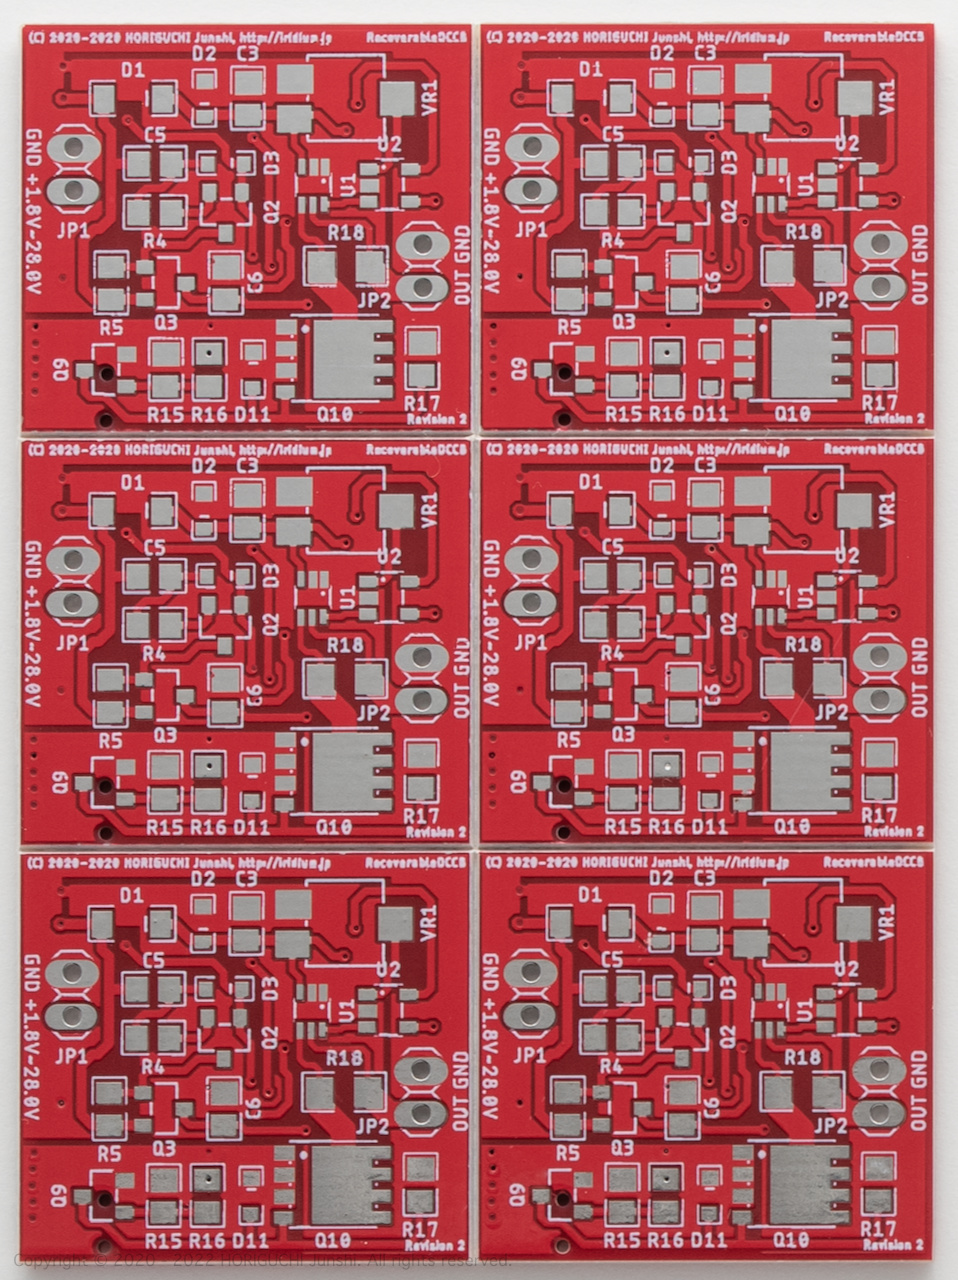 PCB - top (6 panelized)